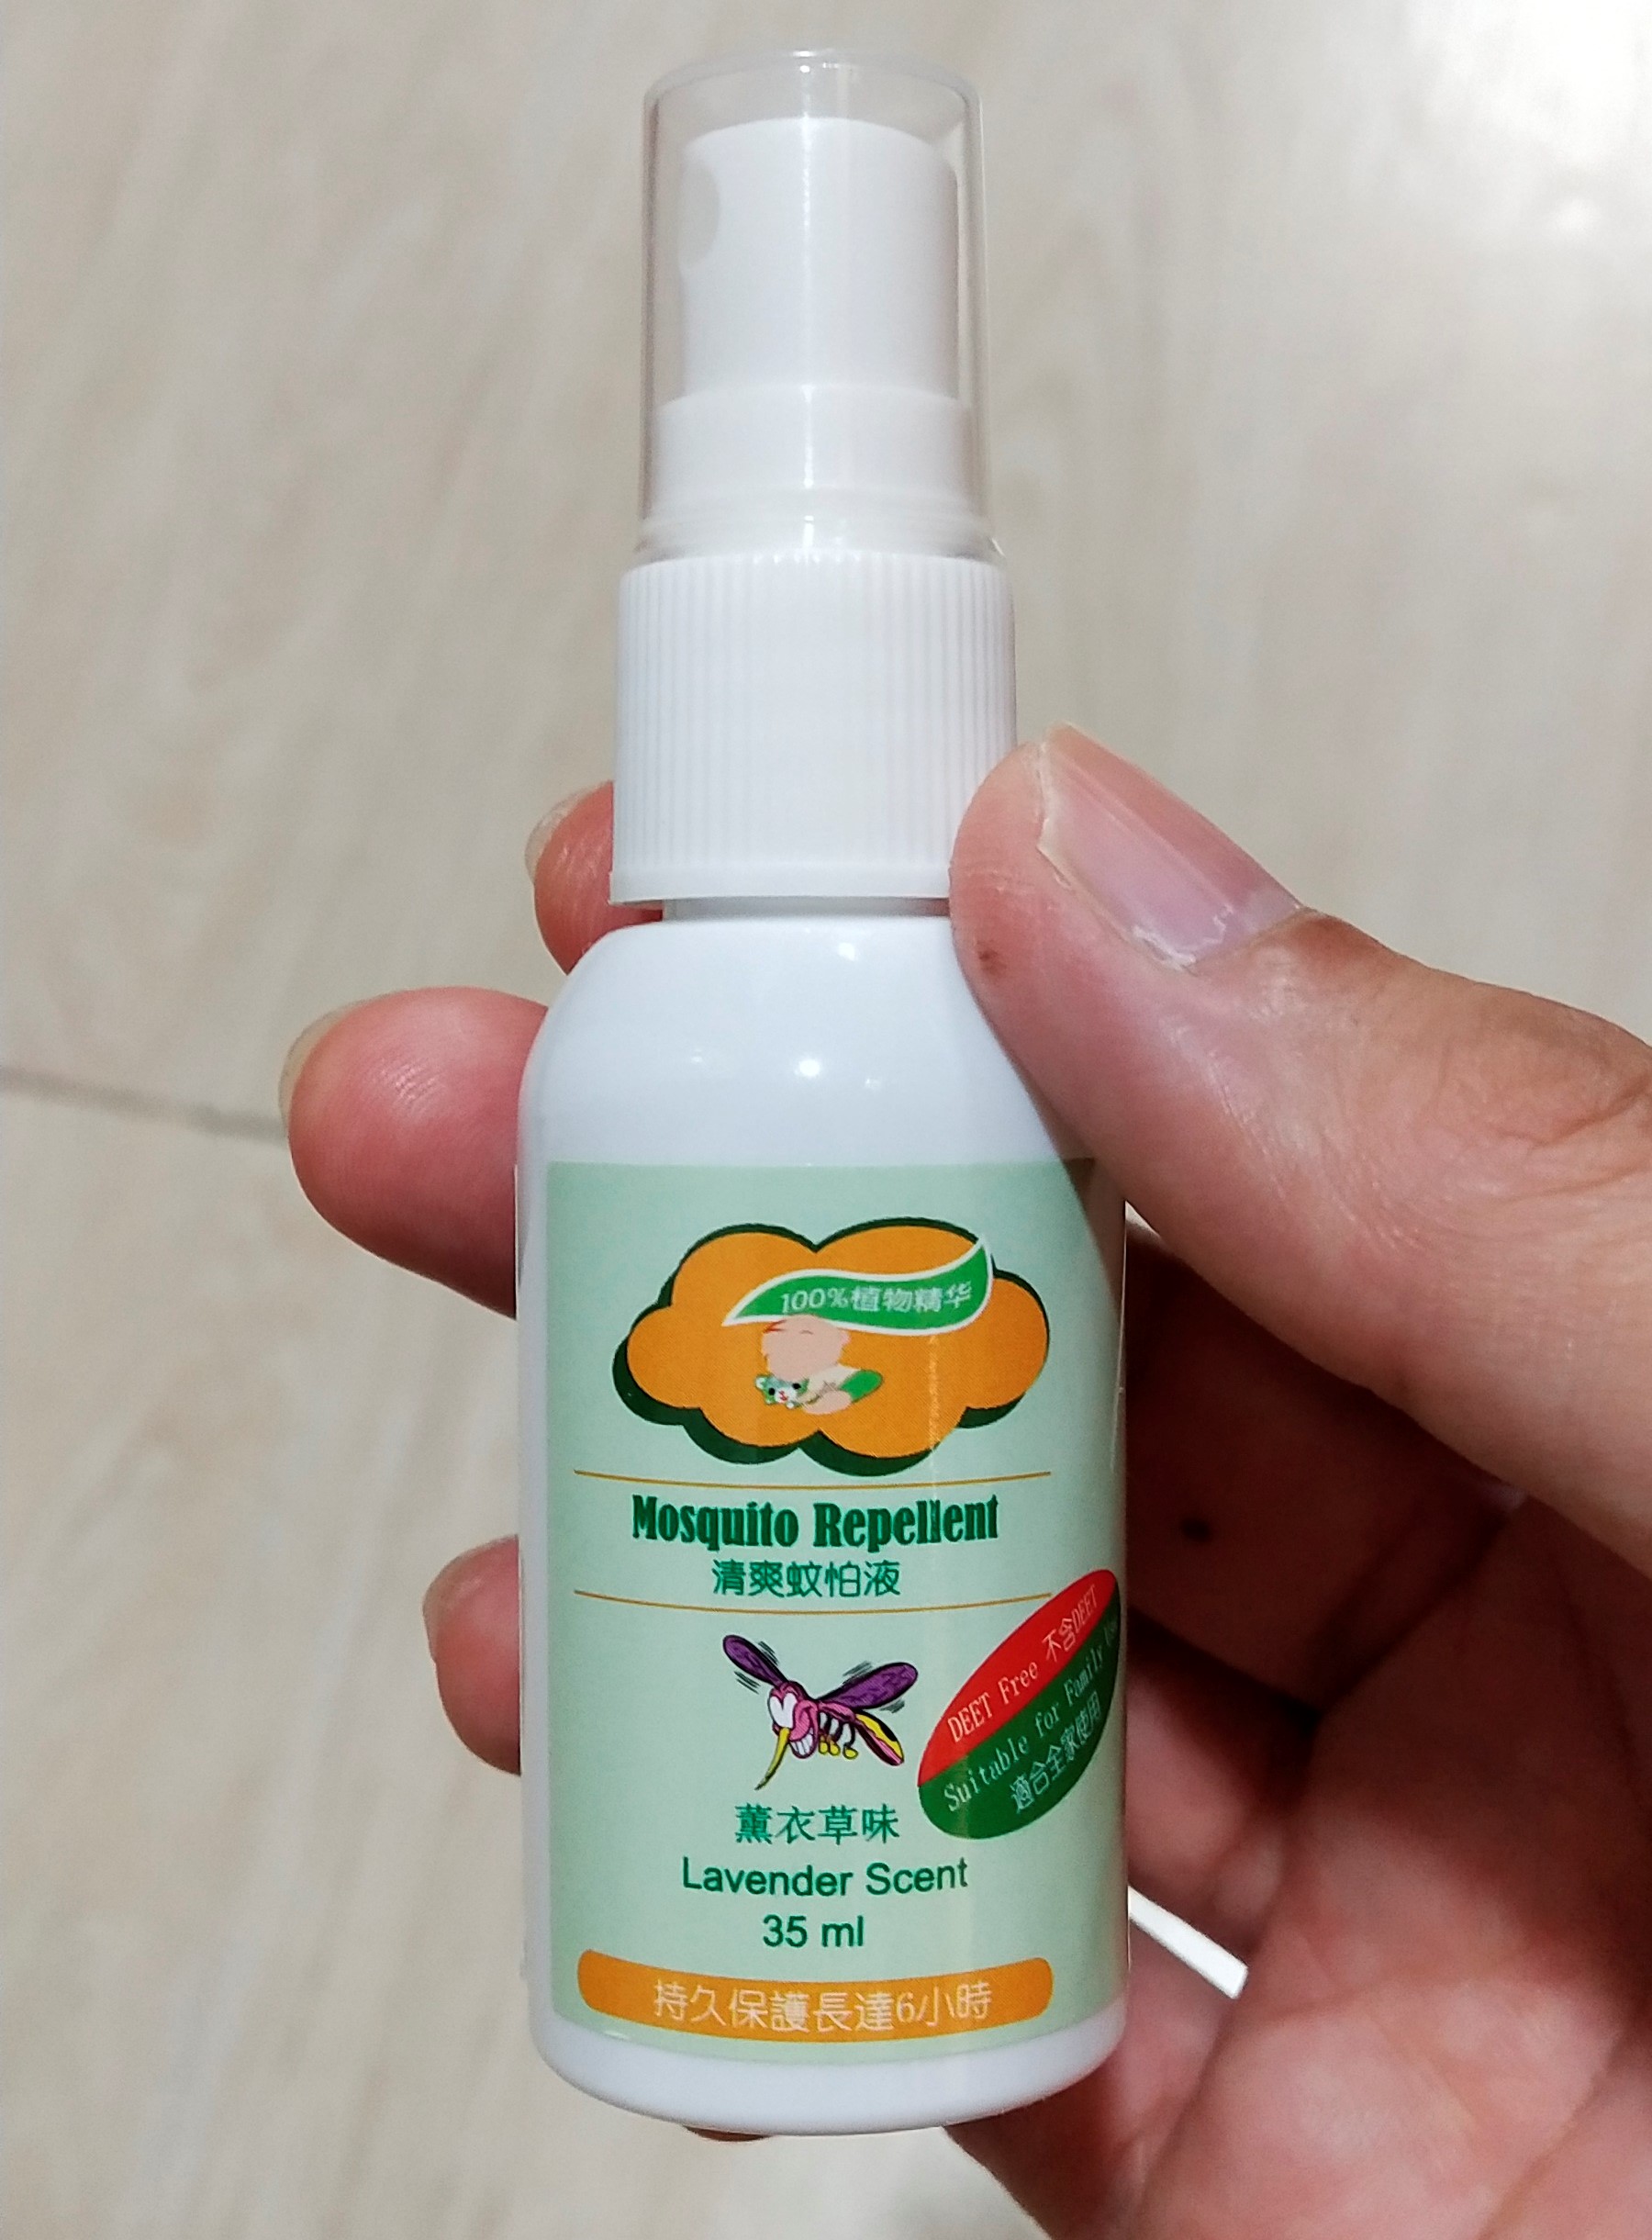 It is good to bring mosquito repellent during your trip.